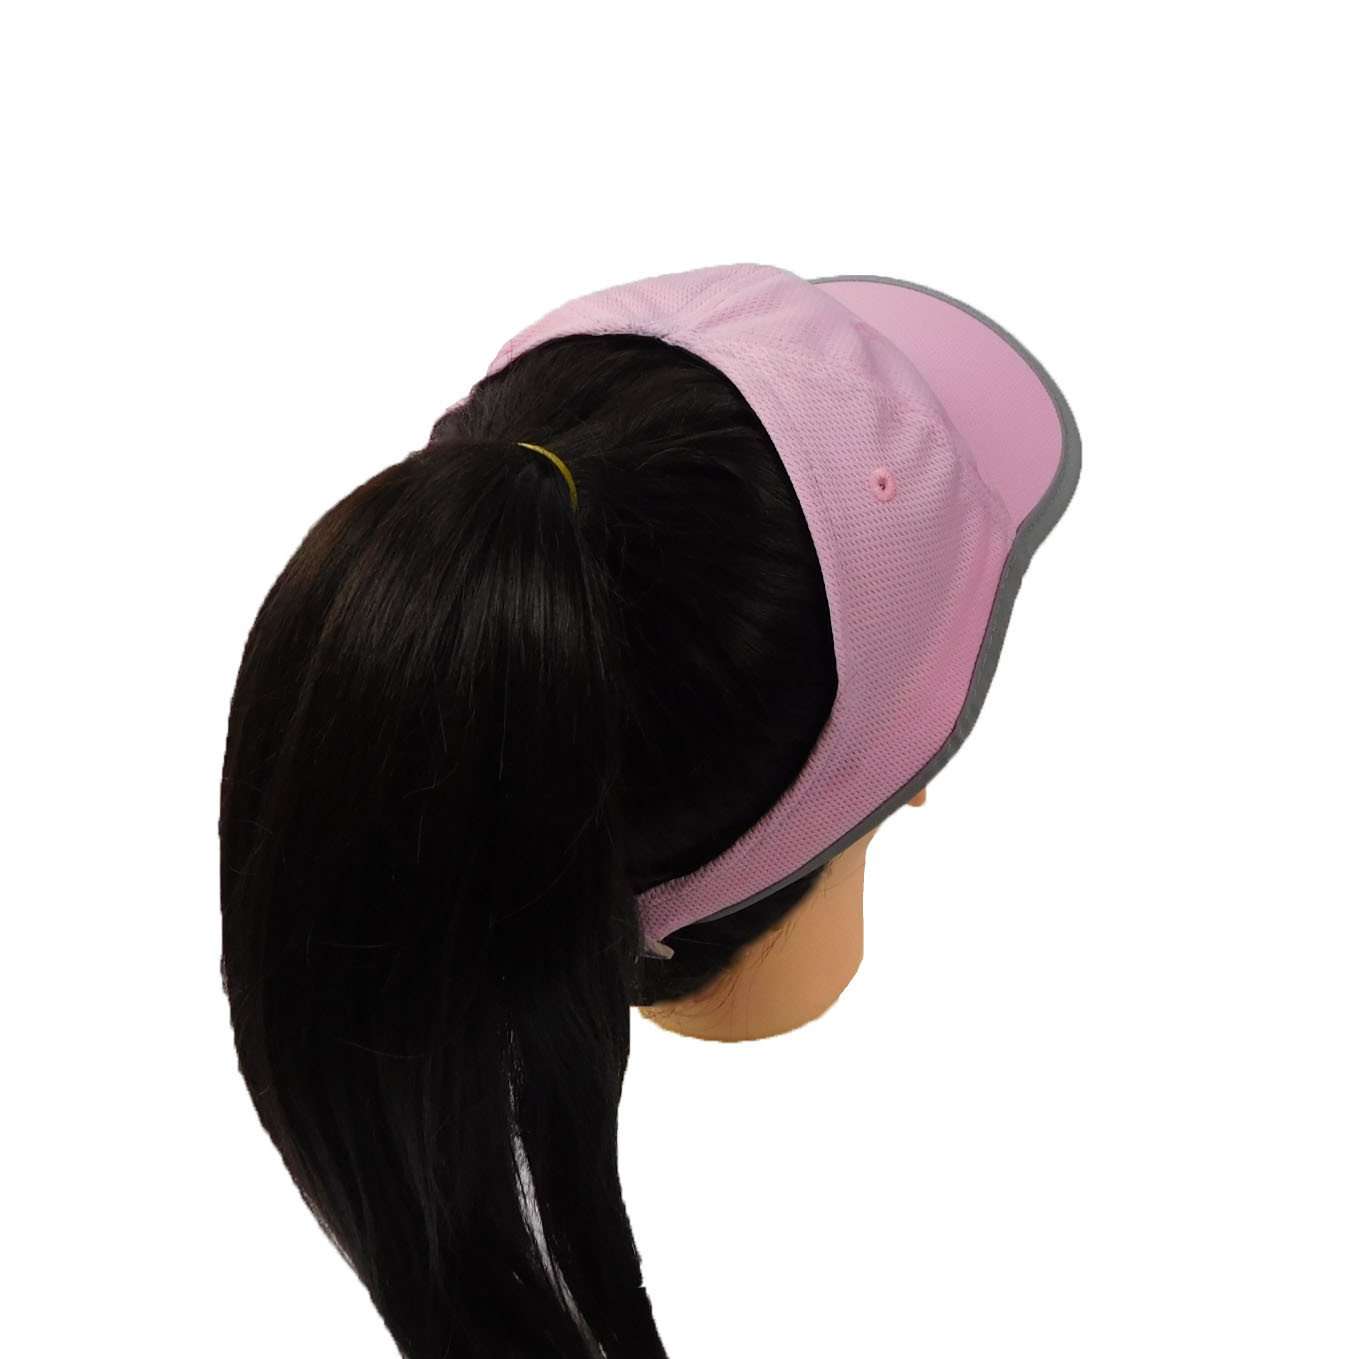 Ginnie Cap in Rayon Mesh with Golf Logo Cap Great hats by Karen Keith GCME-Gpk Pink  